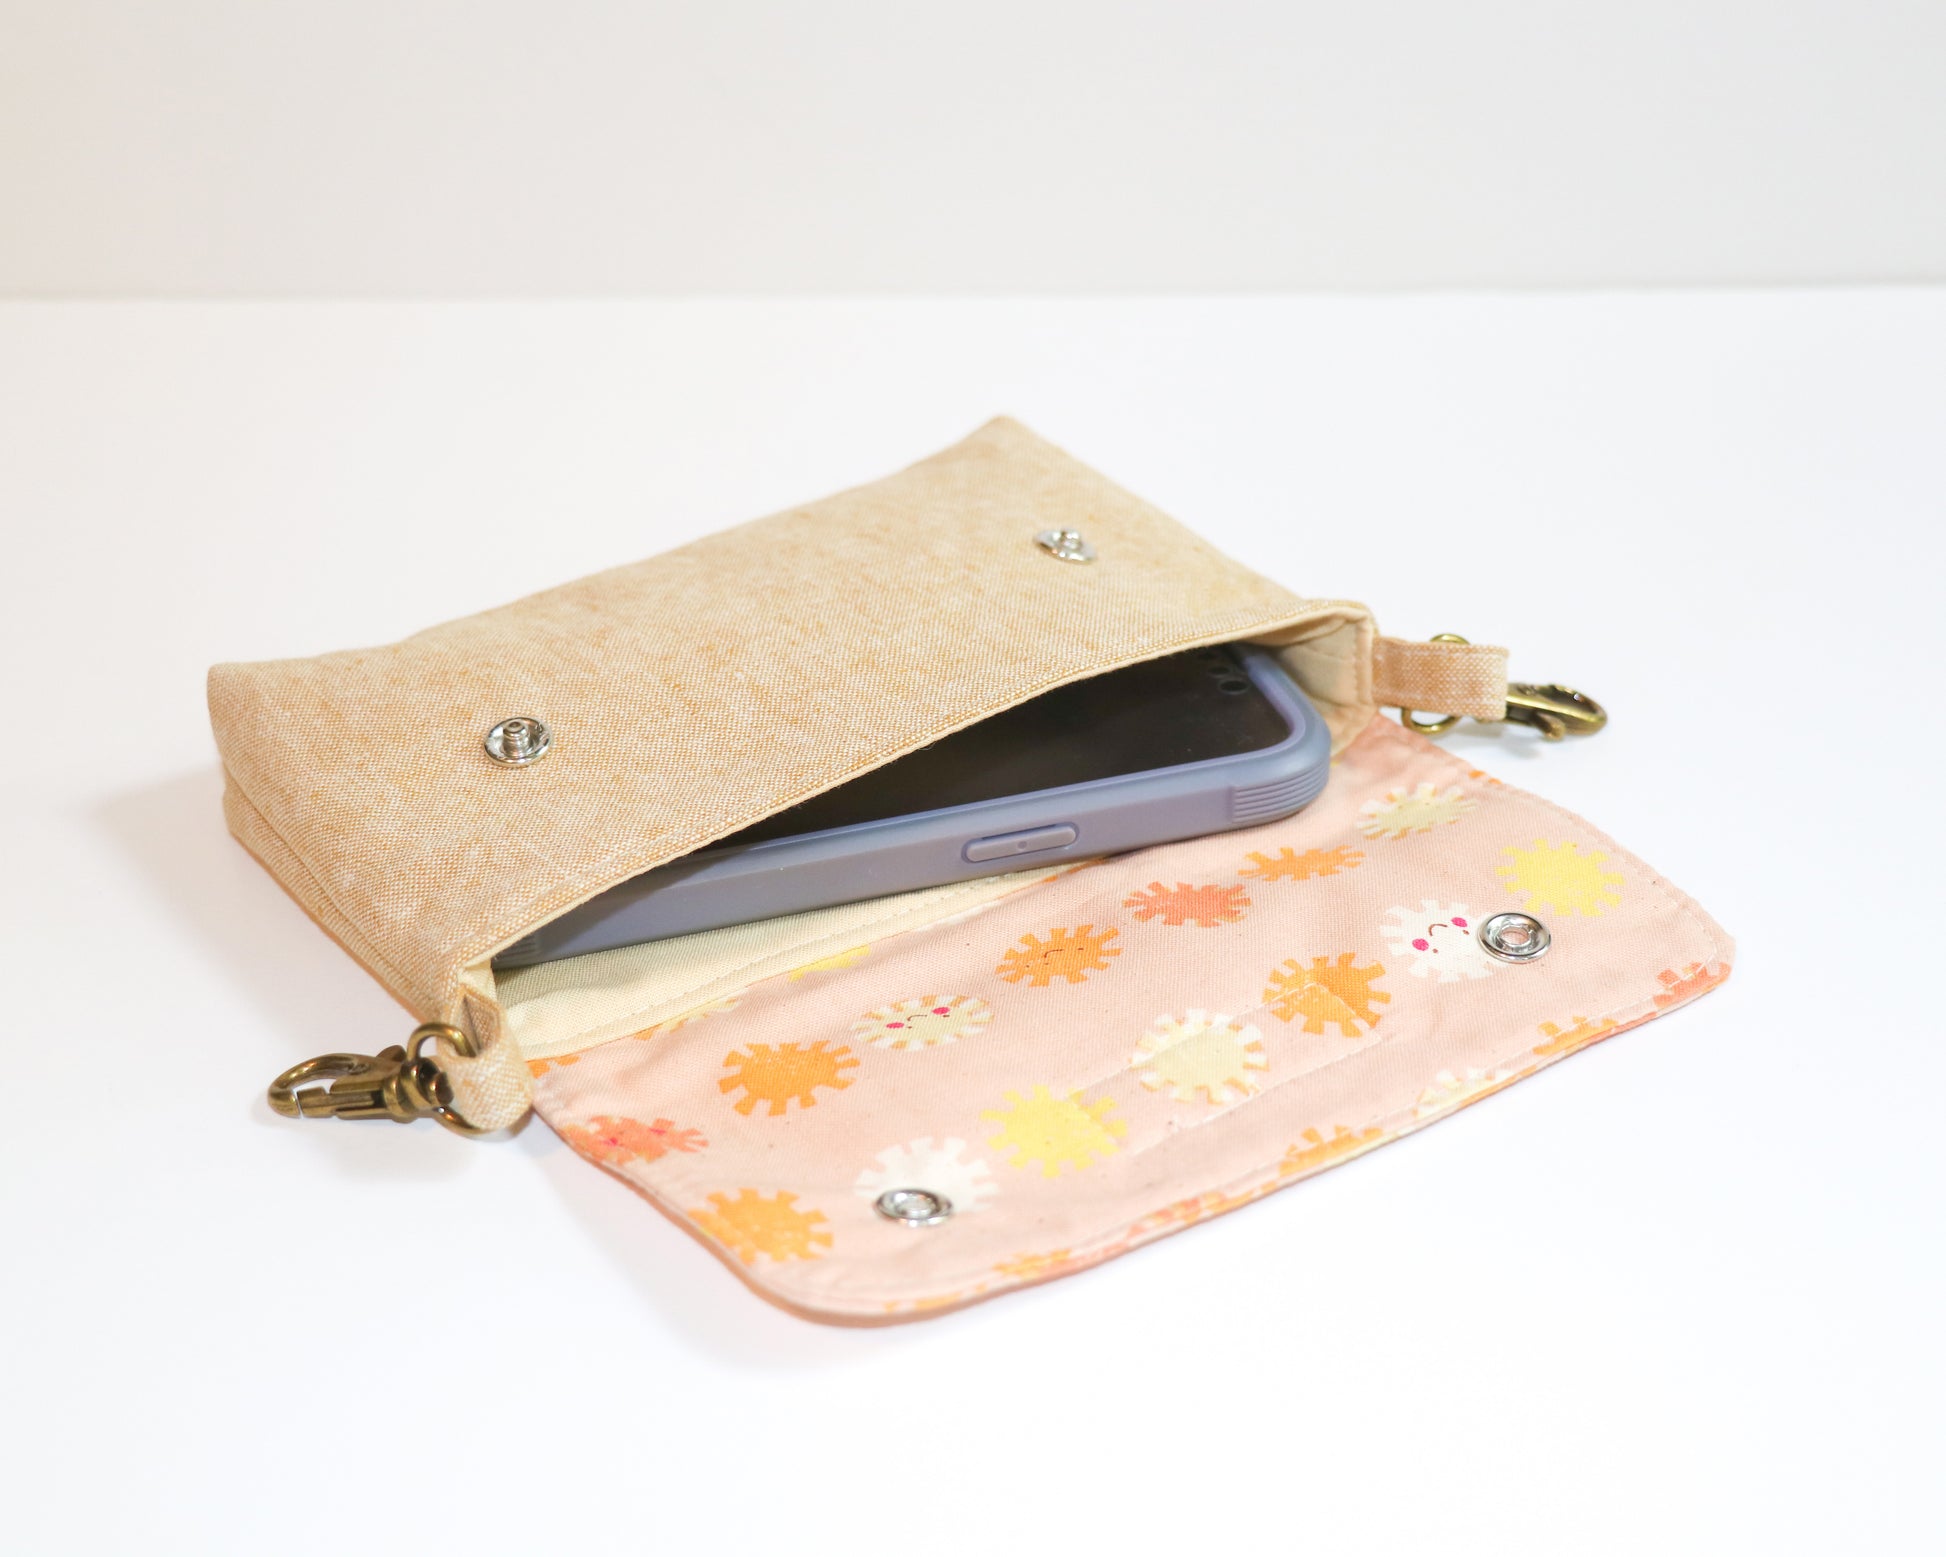 coral sunshine belt loop pouch, inside view with phone